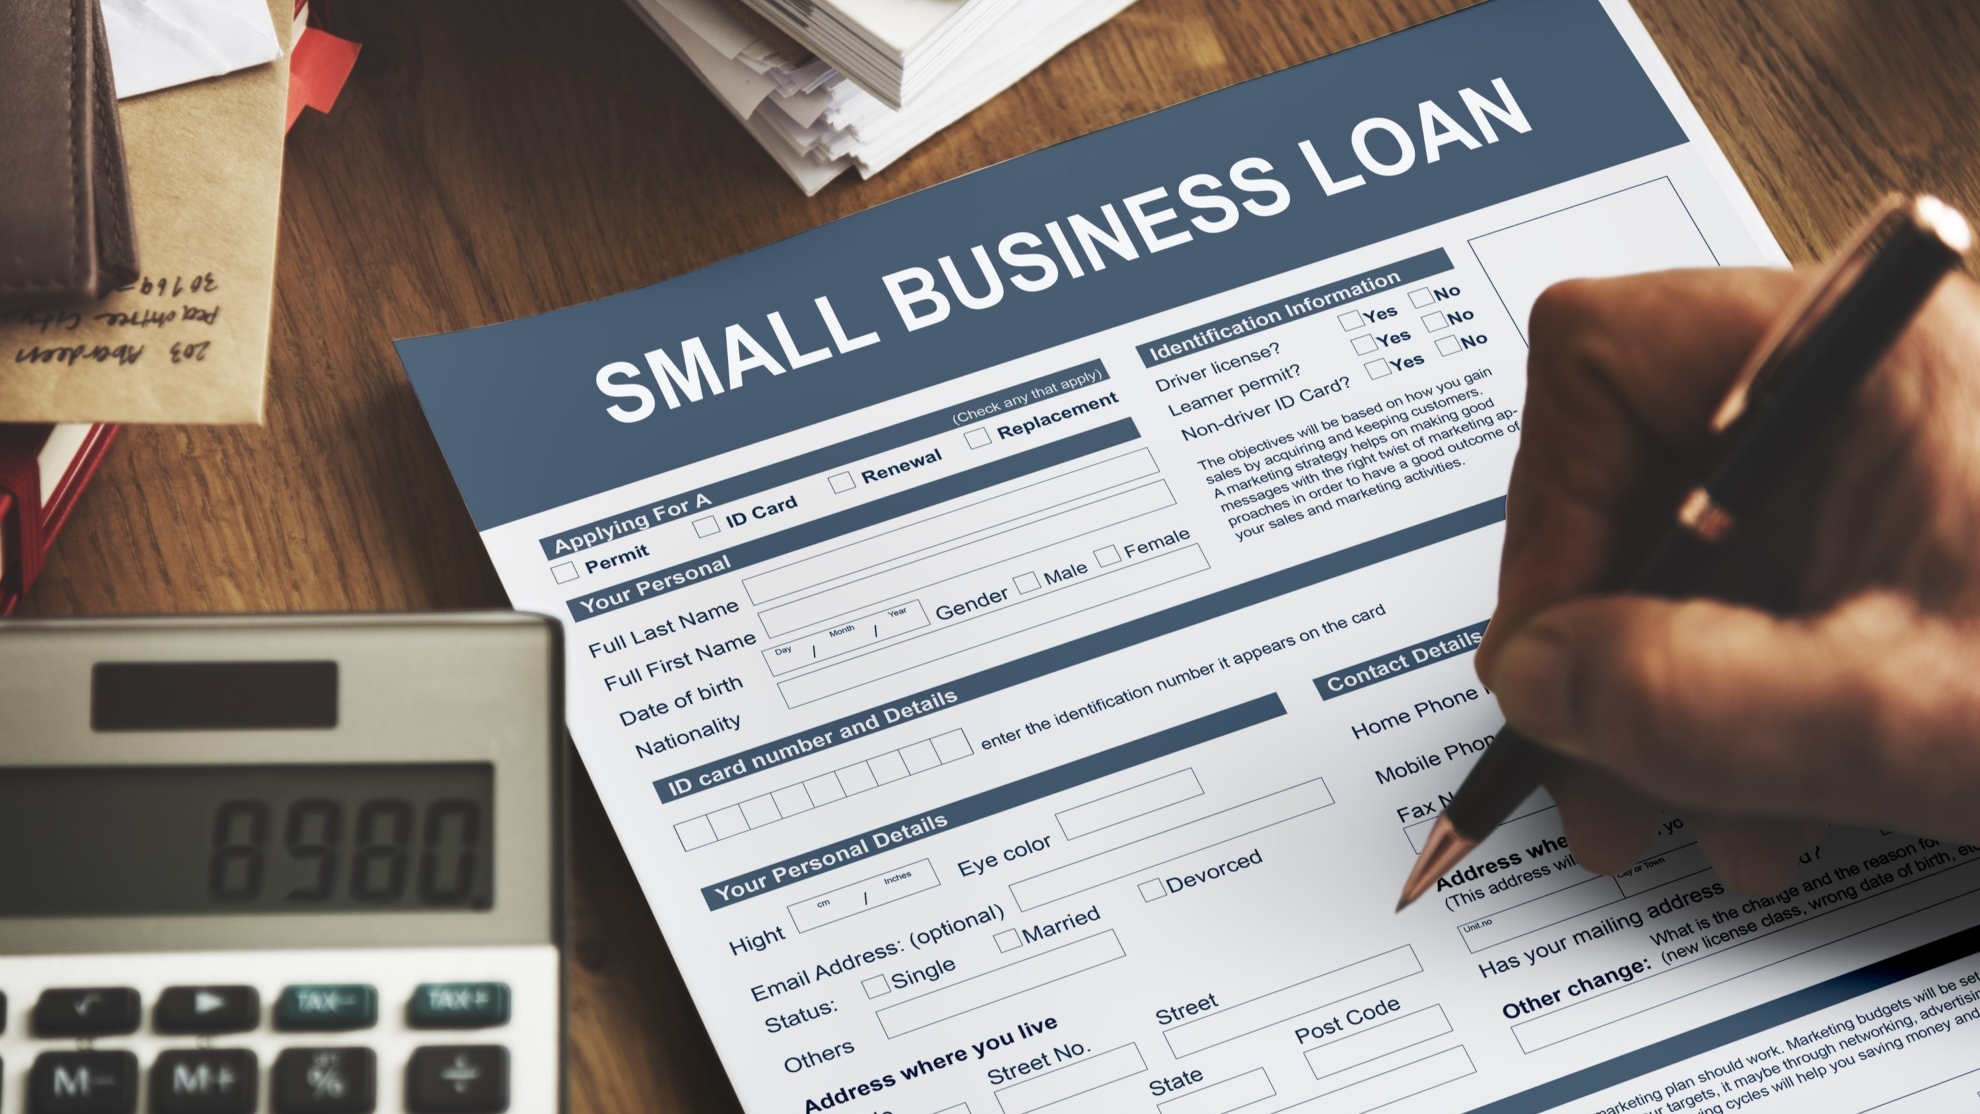 Small Business Loans: What You Need to Know